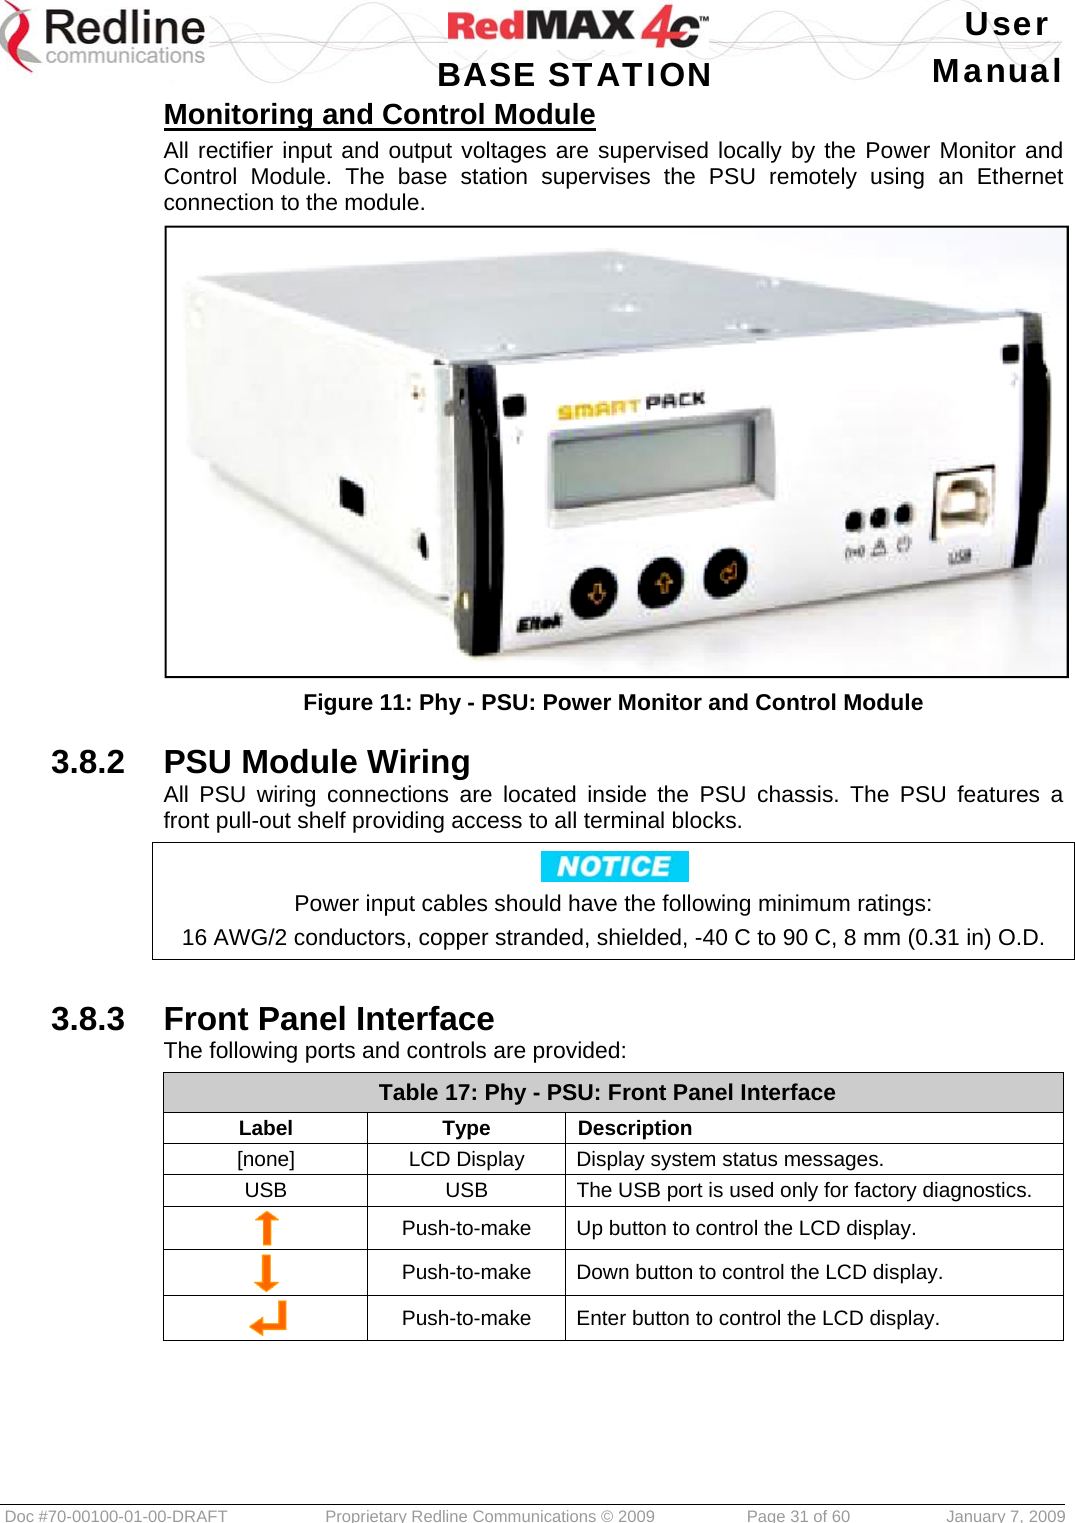   User  BASE STATION Manual  Doc #70-00100-01-00-DRAFT  Proprietary Redline Communications © 2009   Page 31 of 60  January 7, 2009 Monitoring and Control Module All rectifier input and output voltages are supervised locally by the Power Monitor and Control Module. The base station supervises the PSU remotely using an Ethernet connection to the module.  Figure 11: Phy - PSU: Power Monitor and Control Module  3.8.2  PSU Module Wiring All PSU wiring connections are located inside the PSU chassis. The PSU features a front pull-out shelf providing access to all terminal blocks.  Power input cables should have the following minimum ratings: 16 AWG/2 conductors, copper stranded, shielded, -40 C to 90 C, 8 mm (0.31 in) O.D.  3.8.3  Front Panel Interface The following ports and controls are provided: Table 17: Phy - PSU: Front Panel Interface Label Type Description [none]  LCD Display  Display system status messages. USB  USB  The USB port is used only for factory diagnostics.  Push-to-make  Up button to control the LCD display.  Push-to-make  Down button to control the LCD display.  Push-to-make  Enter button to control the LCD display.     